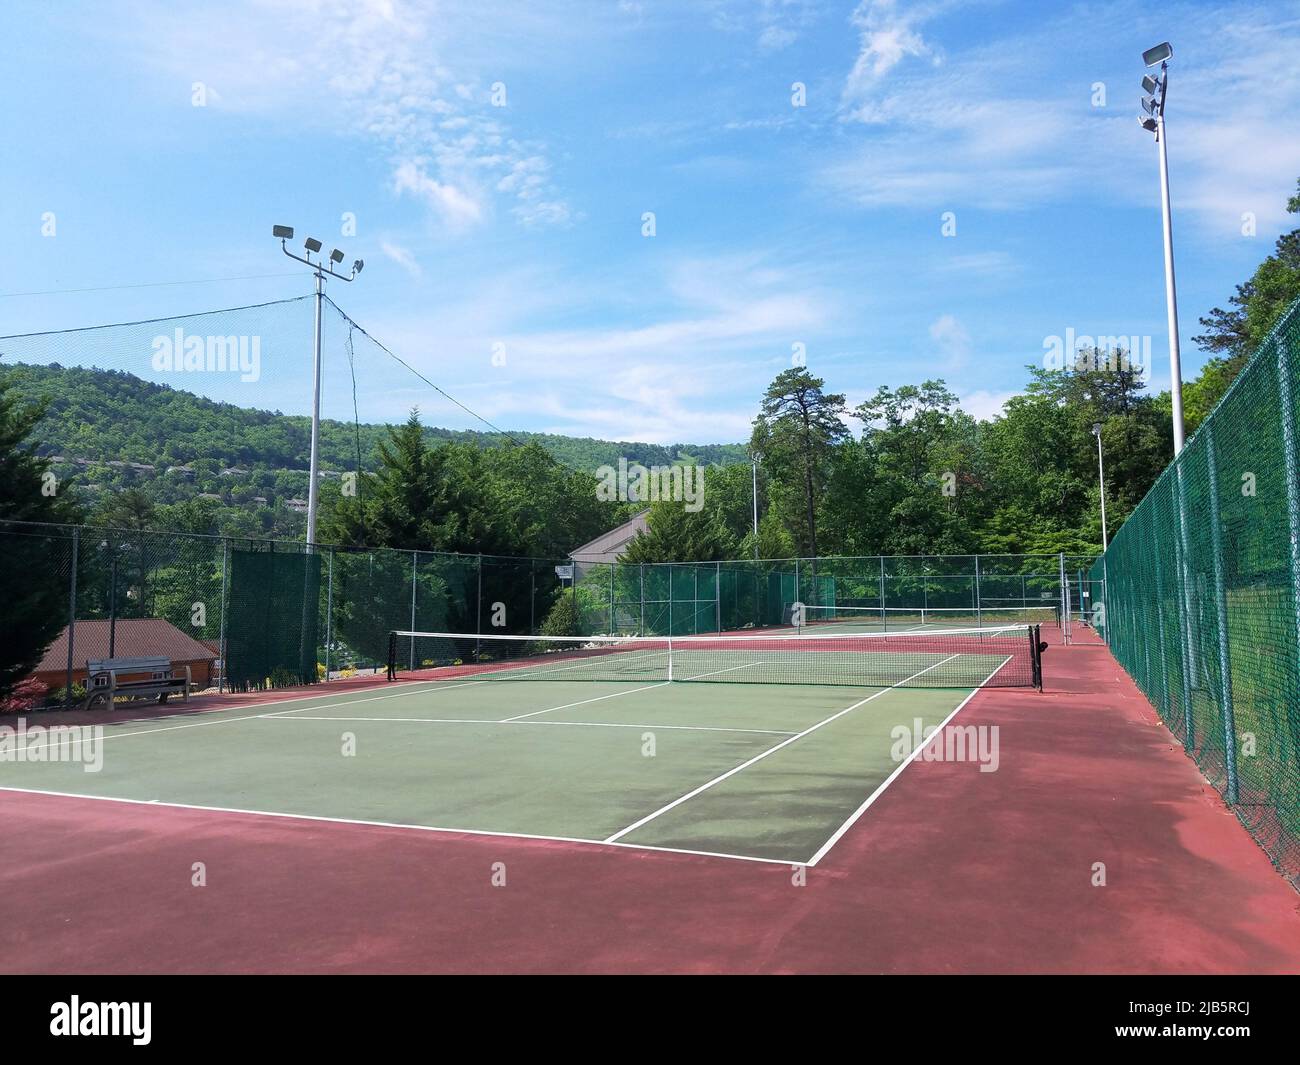 green and red tennis court with fence and lights Stock Photo - Alamy